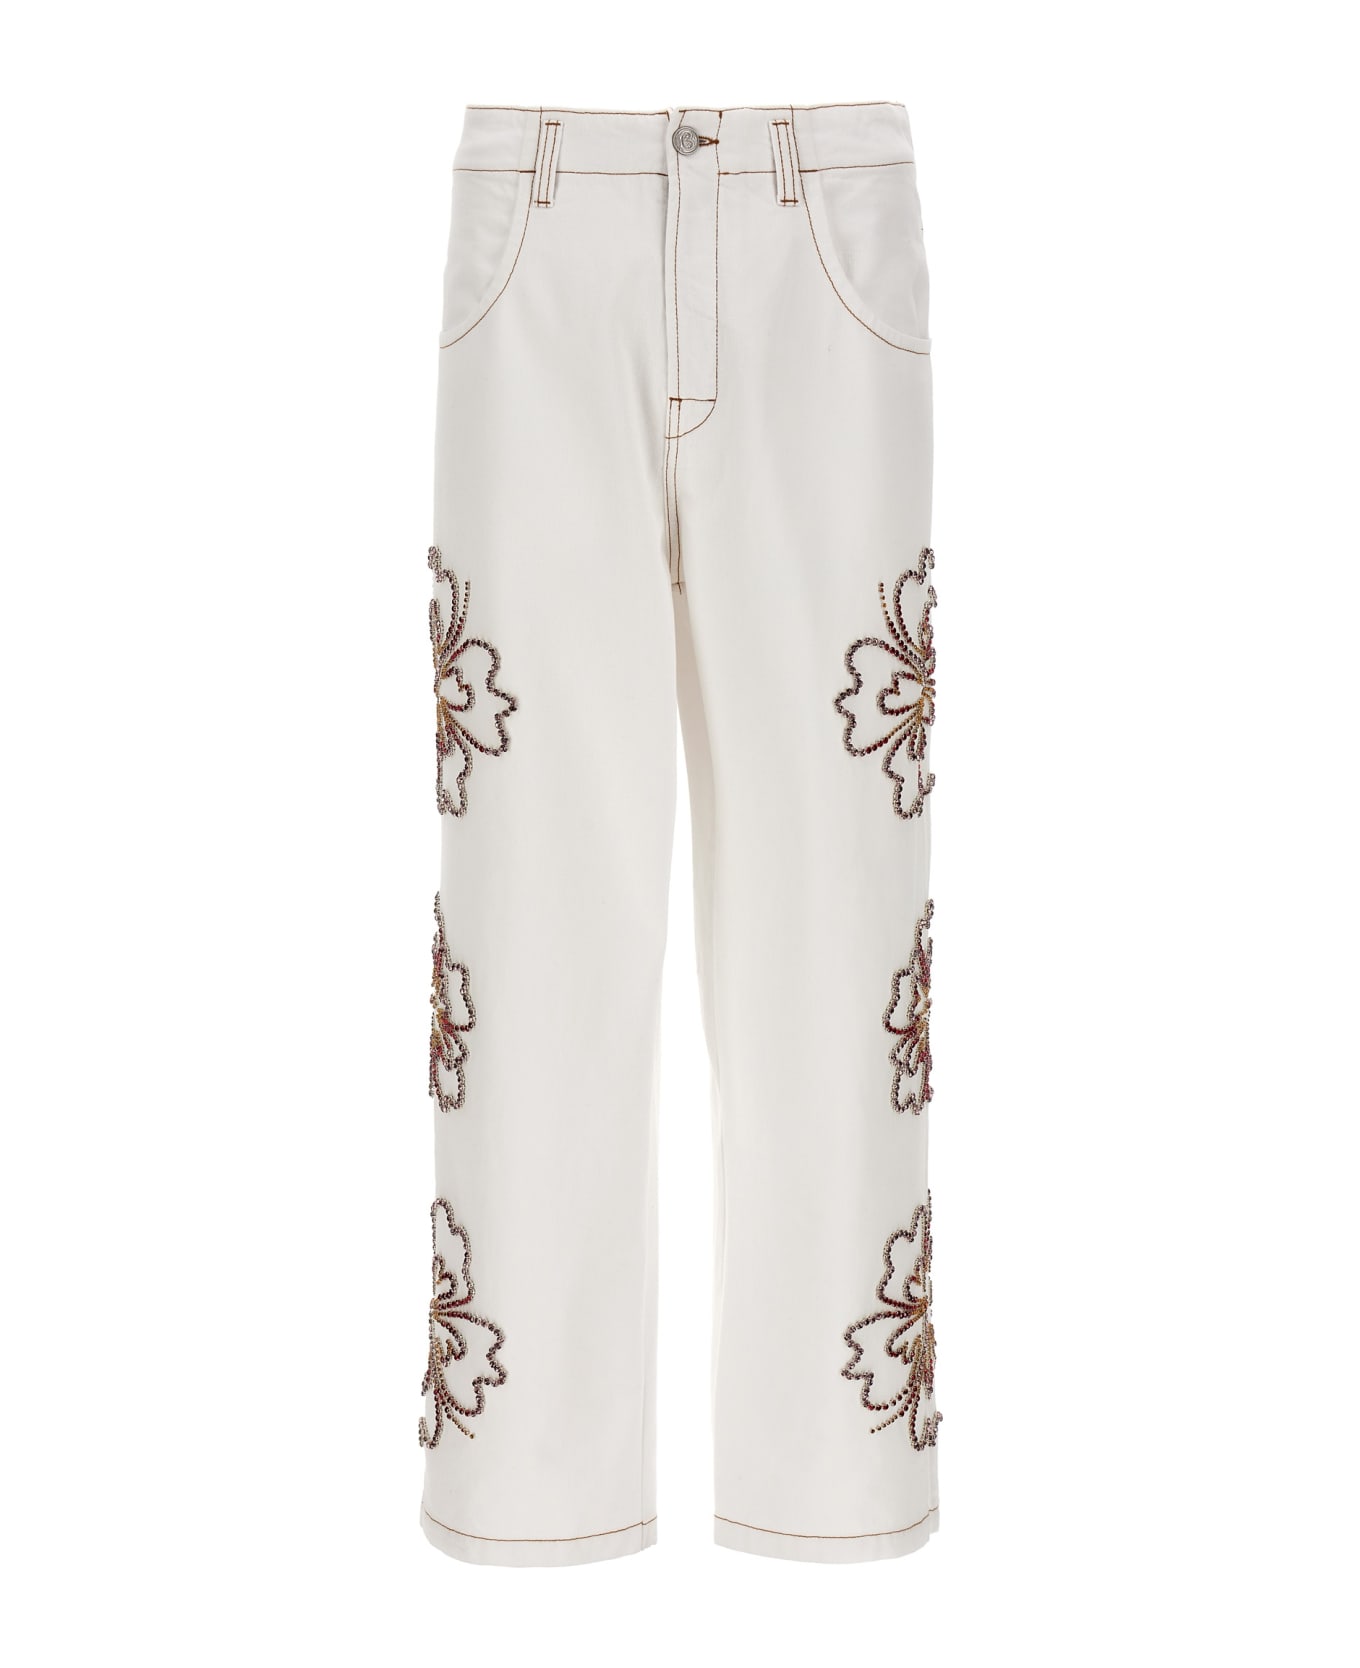 Bluemarble 'embroidered Hibiscus' Jeans - White ボトムス